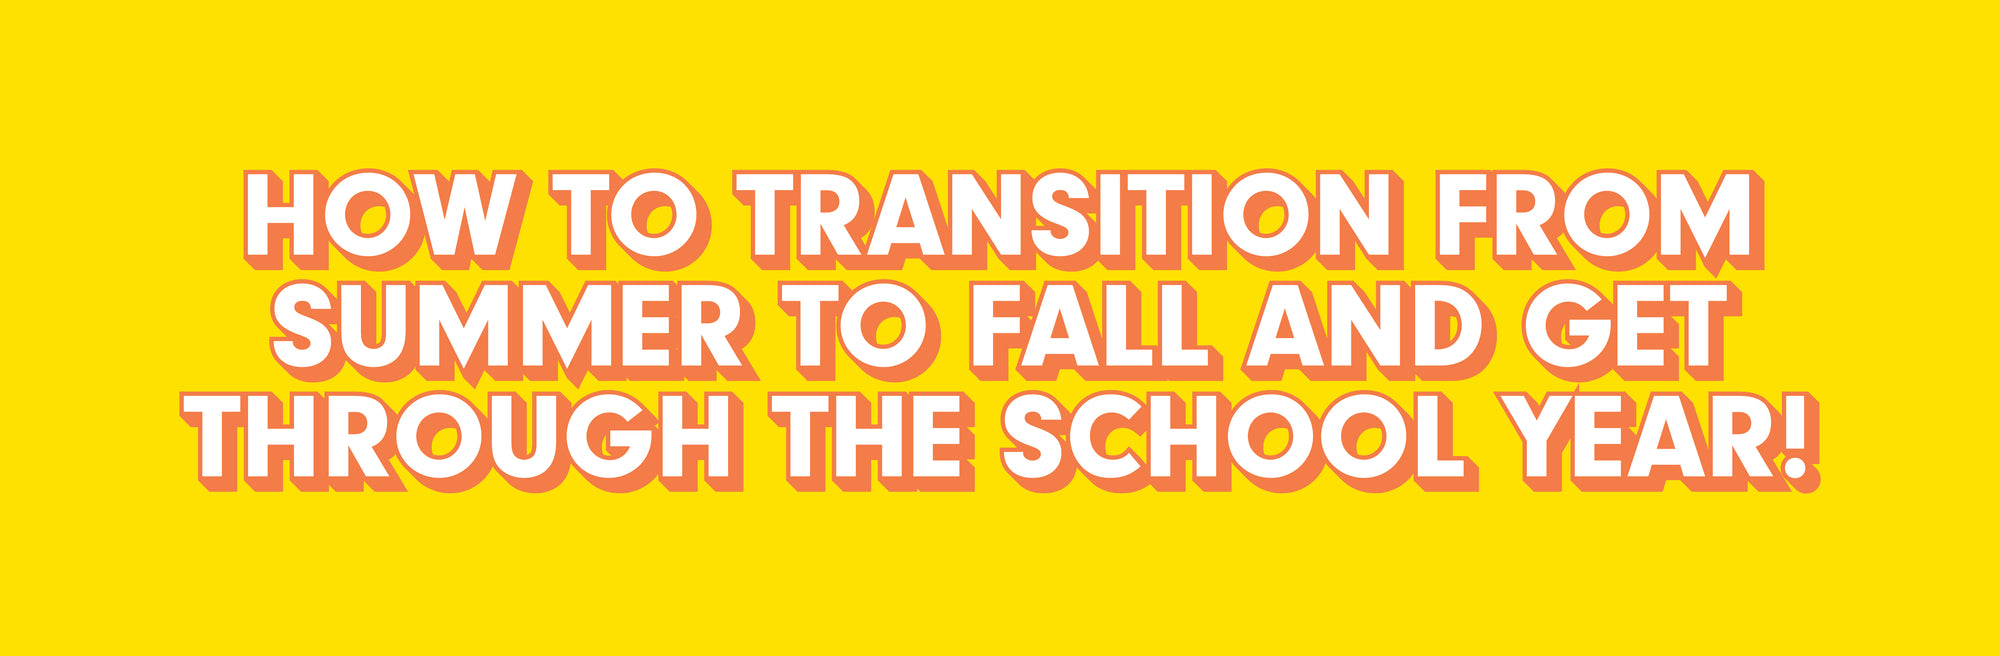 How to transition from summer to fall and get through the school year!